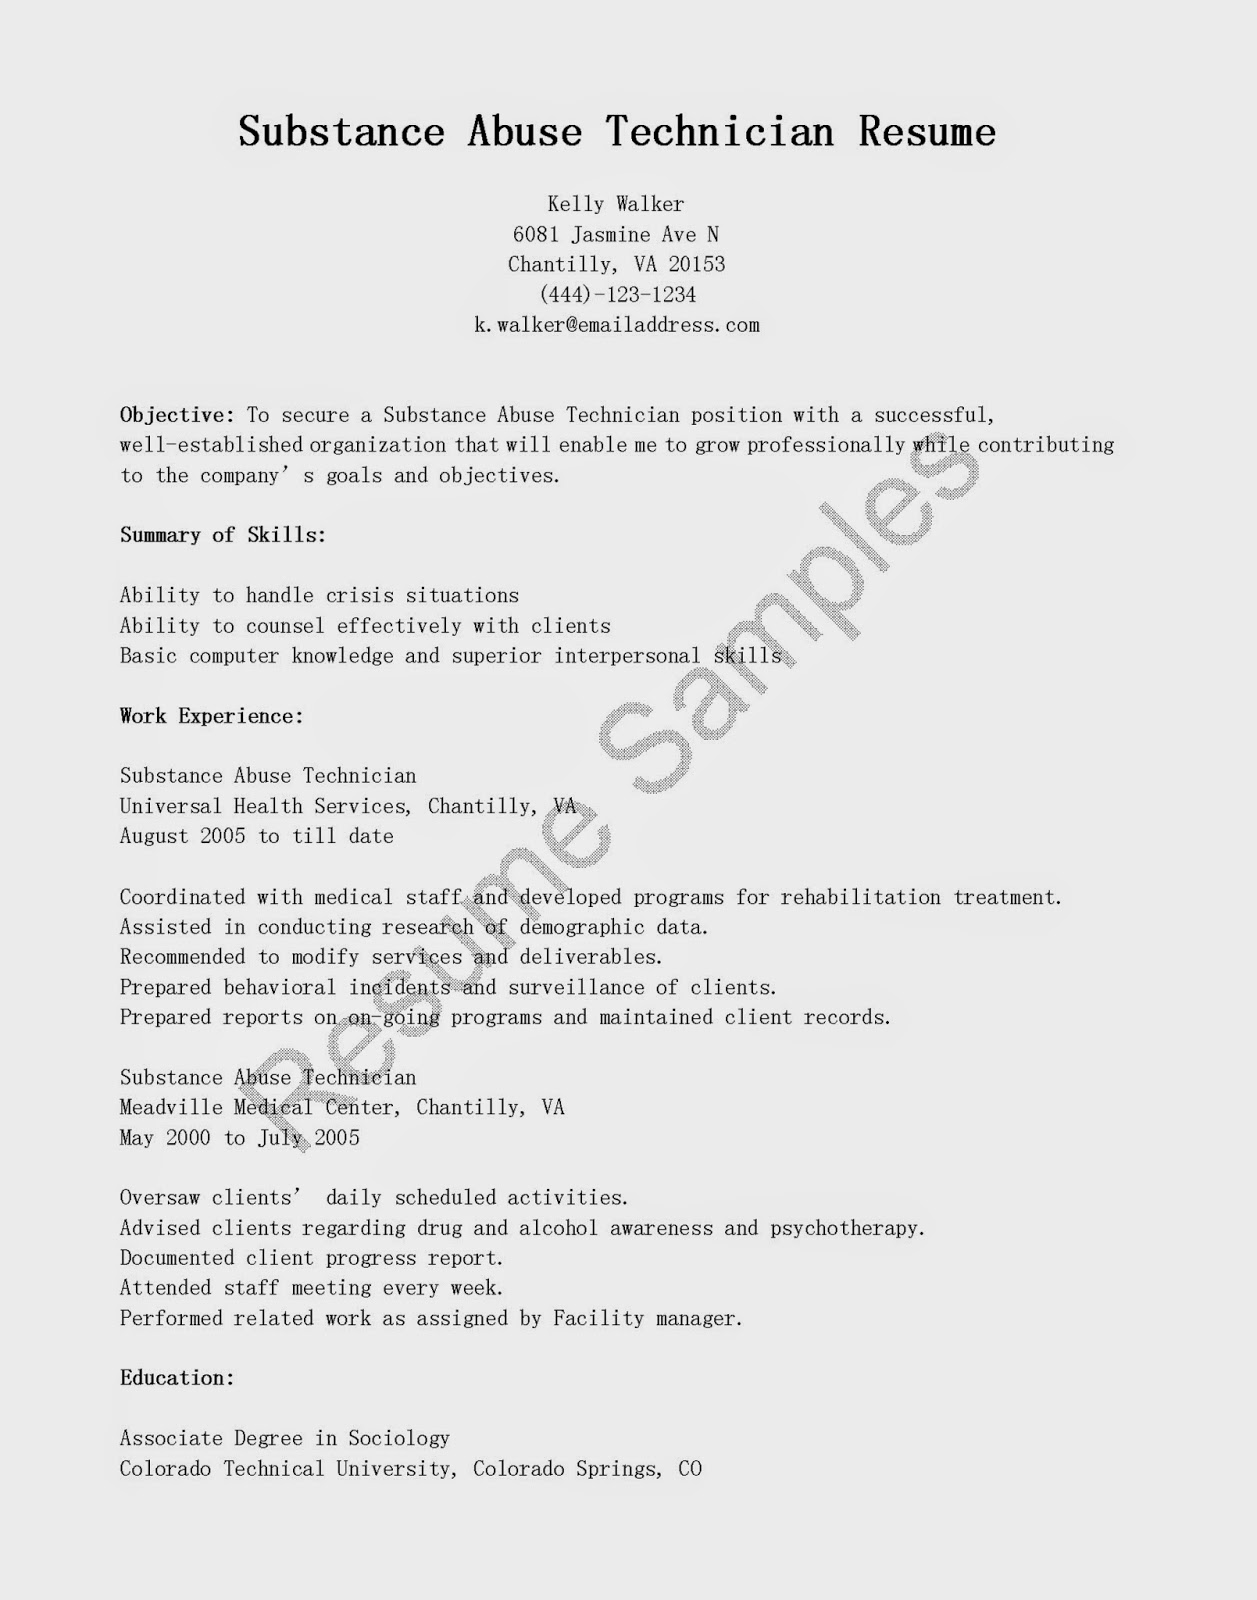 College counseling resume sample